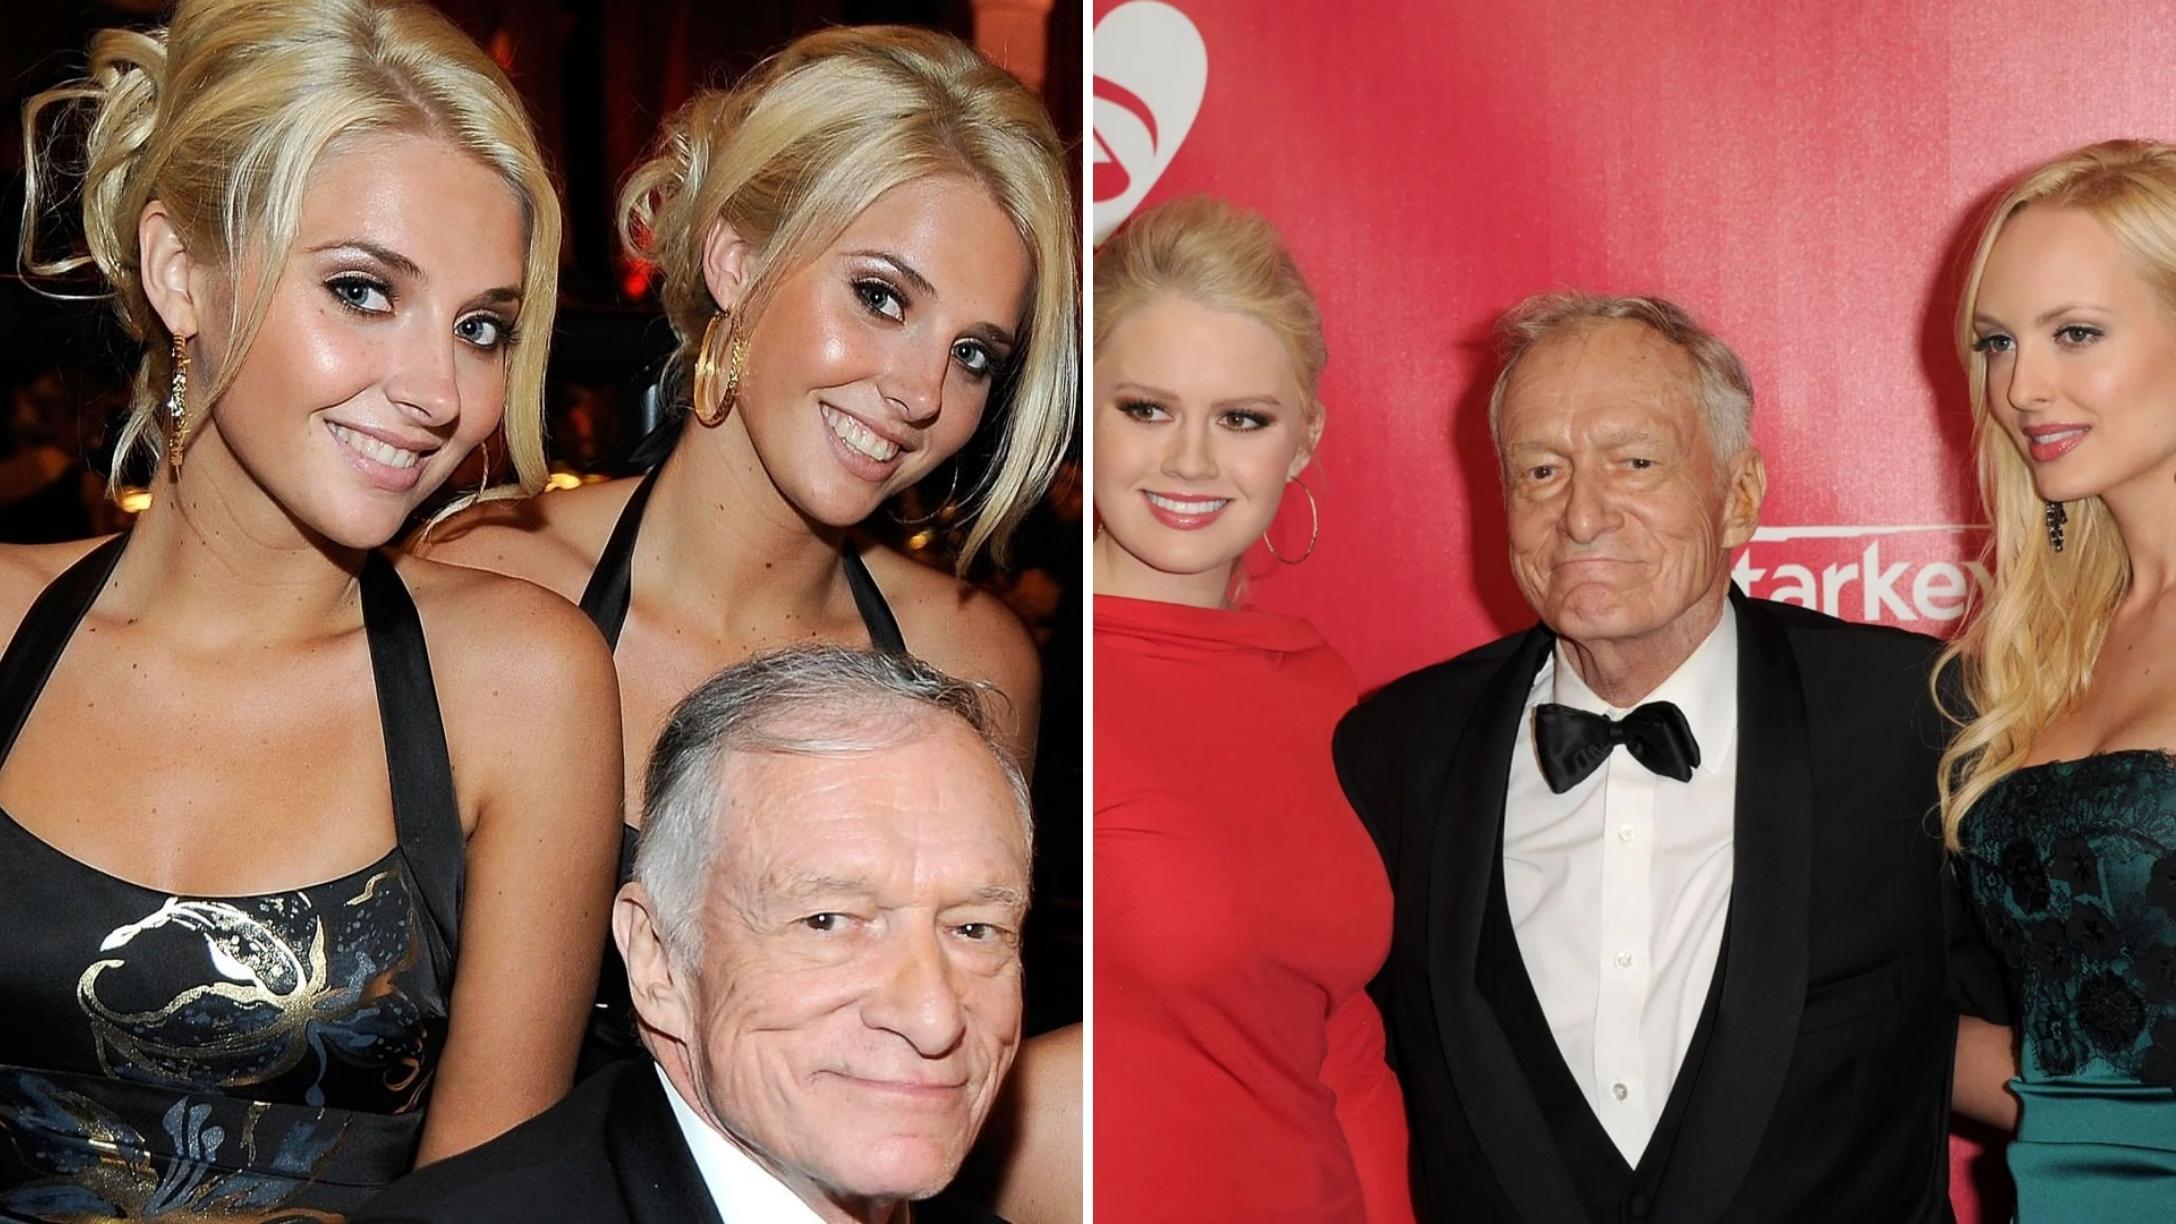 Hugh Hefner Expected Twin Girlfriends To Have Sex With Him The Night They Turned 19 LittleThings picture